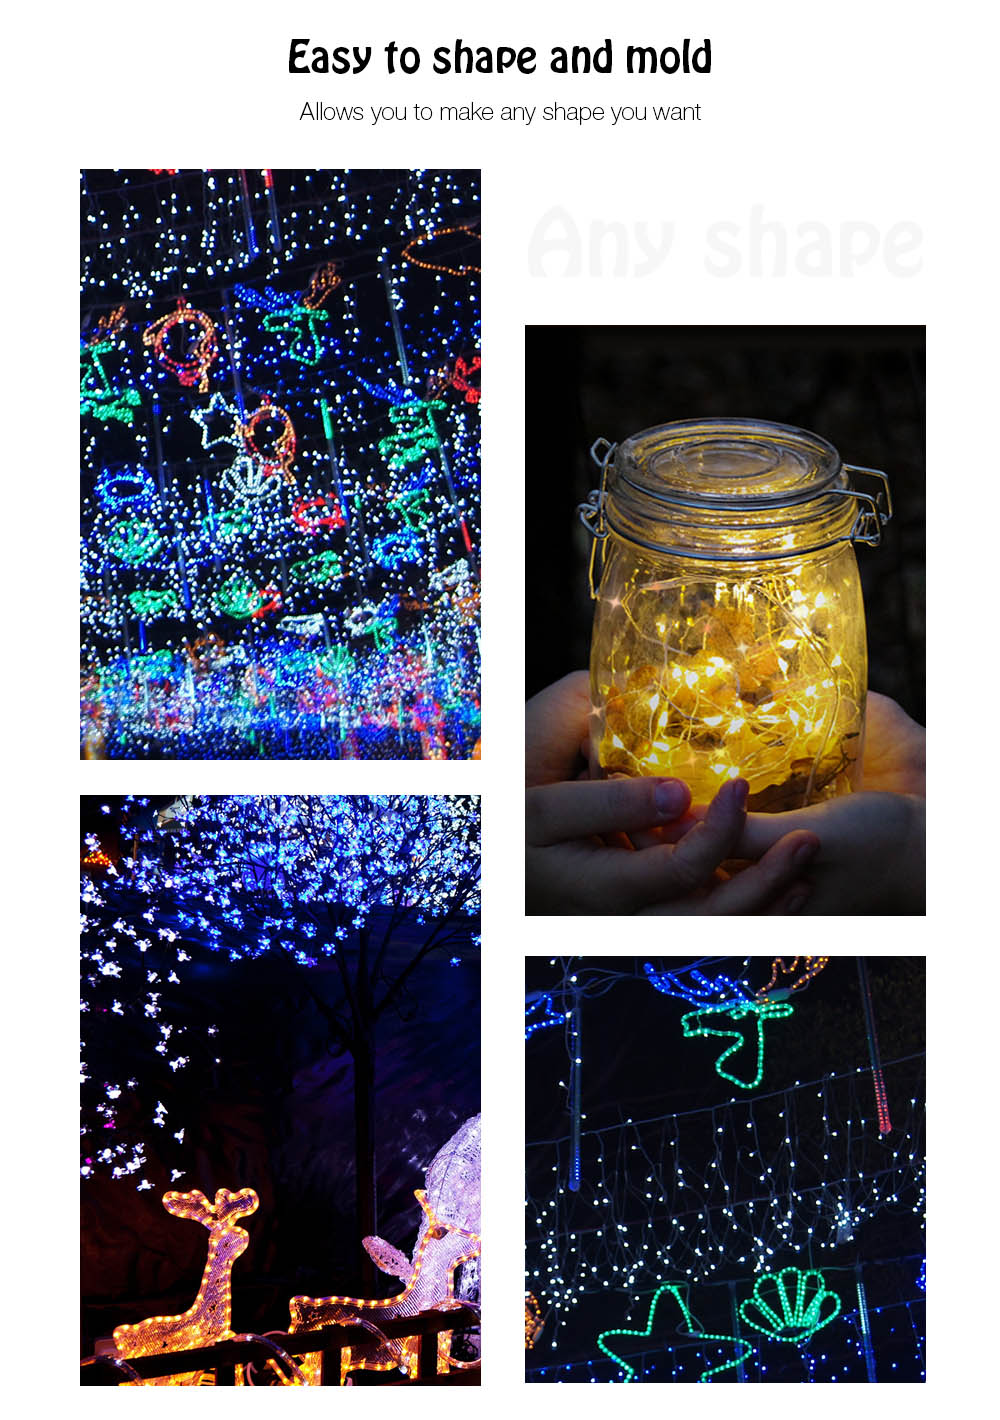 5M 50 LEDs Copper Wire Fairy String Light AA Battery Powered for Christmas Holiday Festival Decoration